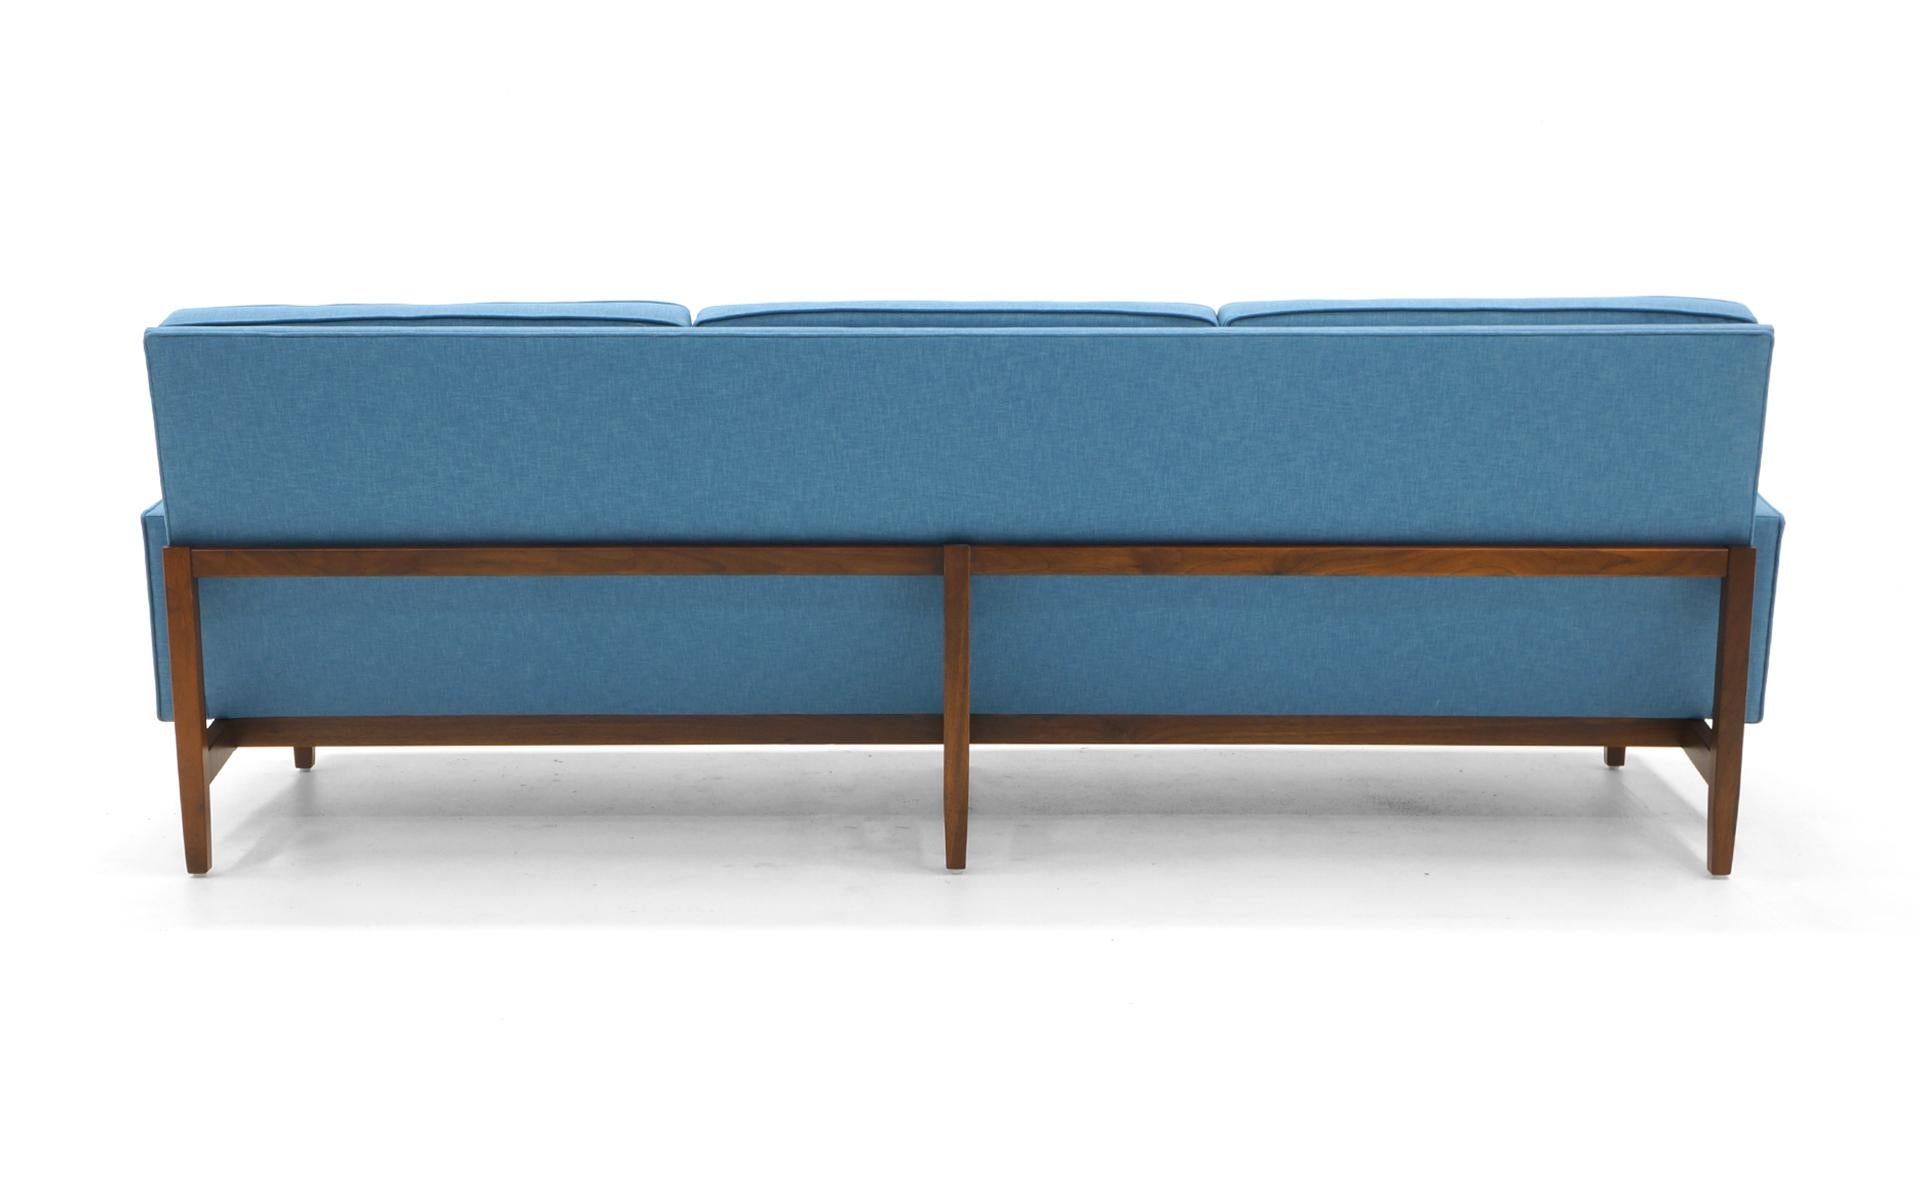 American Florence Knoll Three-Seat Sofa Walnut Frame Restored, New Blue Upholstery